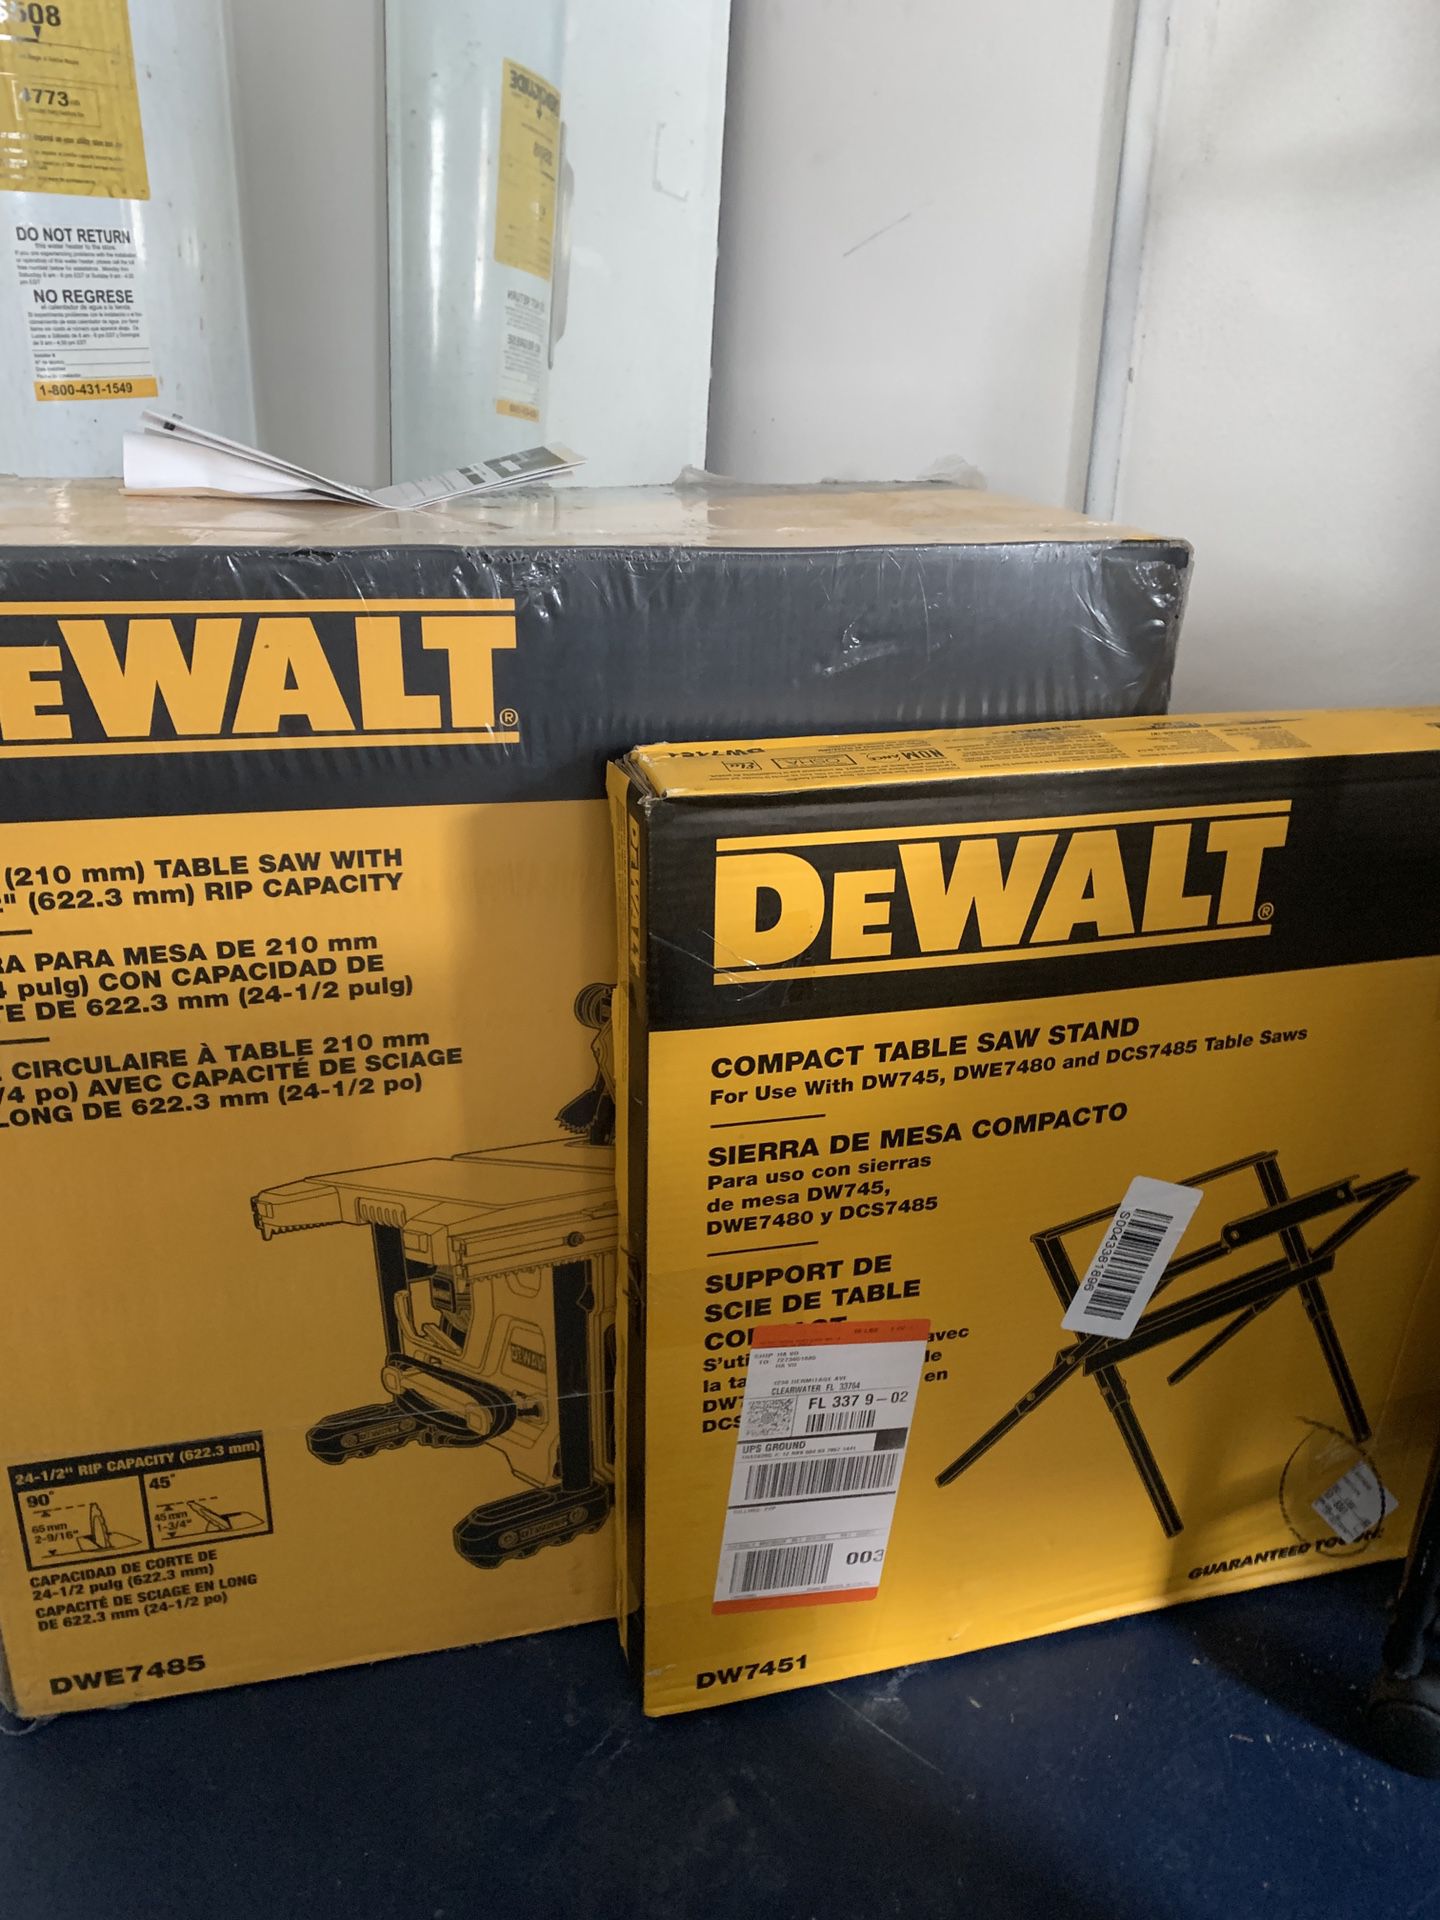 Dewalt 15amp Table saw and stand